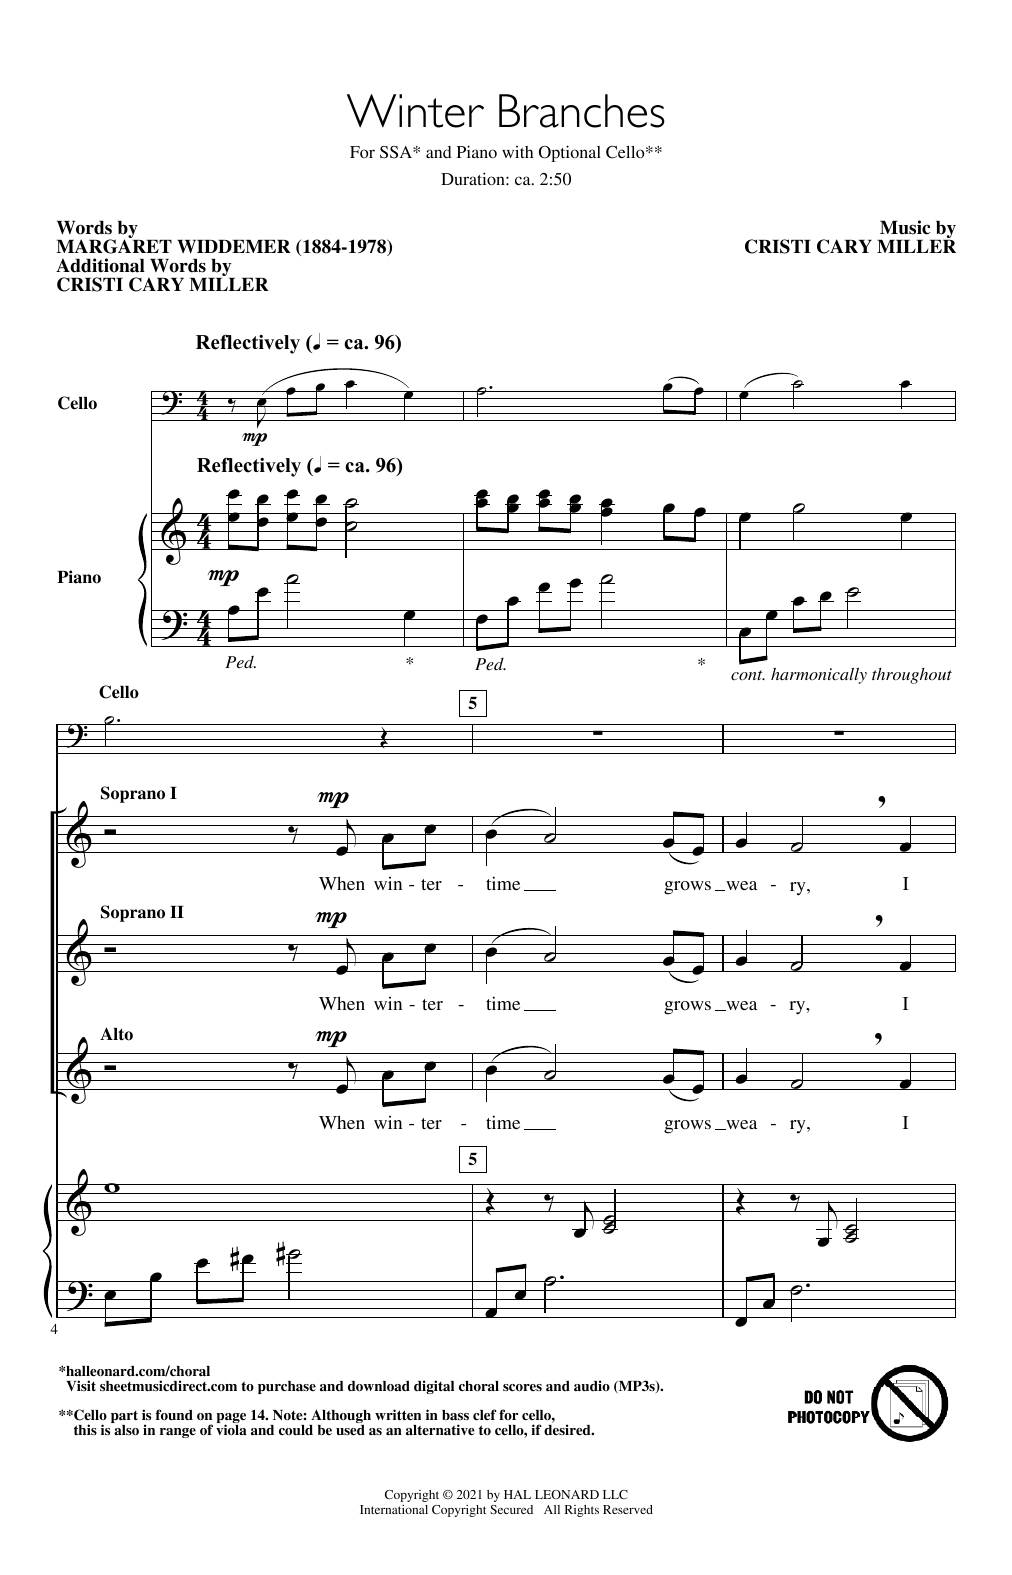 Download Margaret Widdemer and Cristi Cary Mi Winter Branches Sheet Music